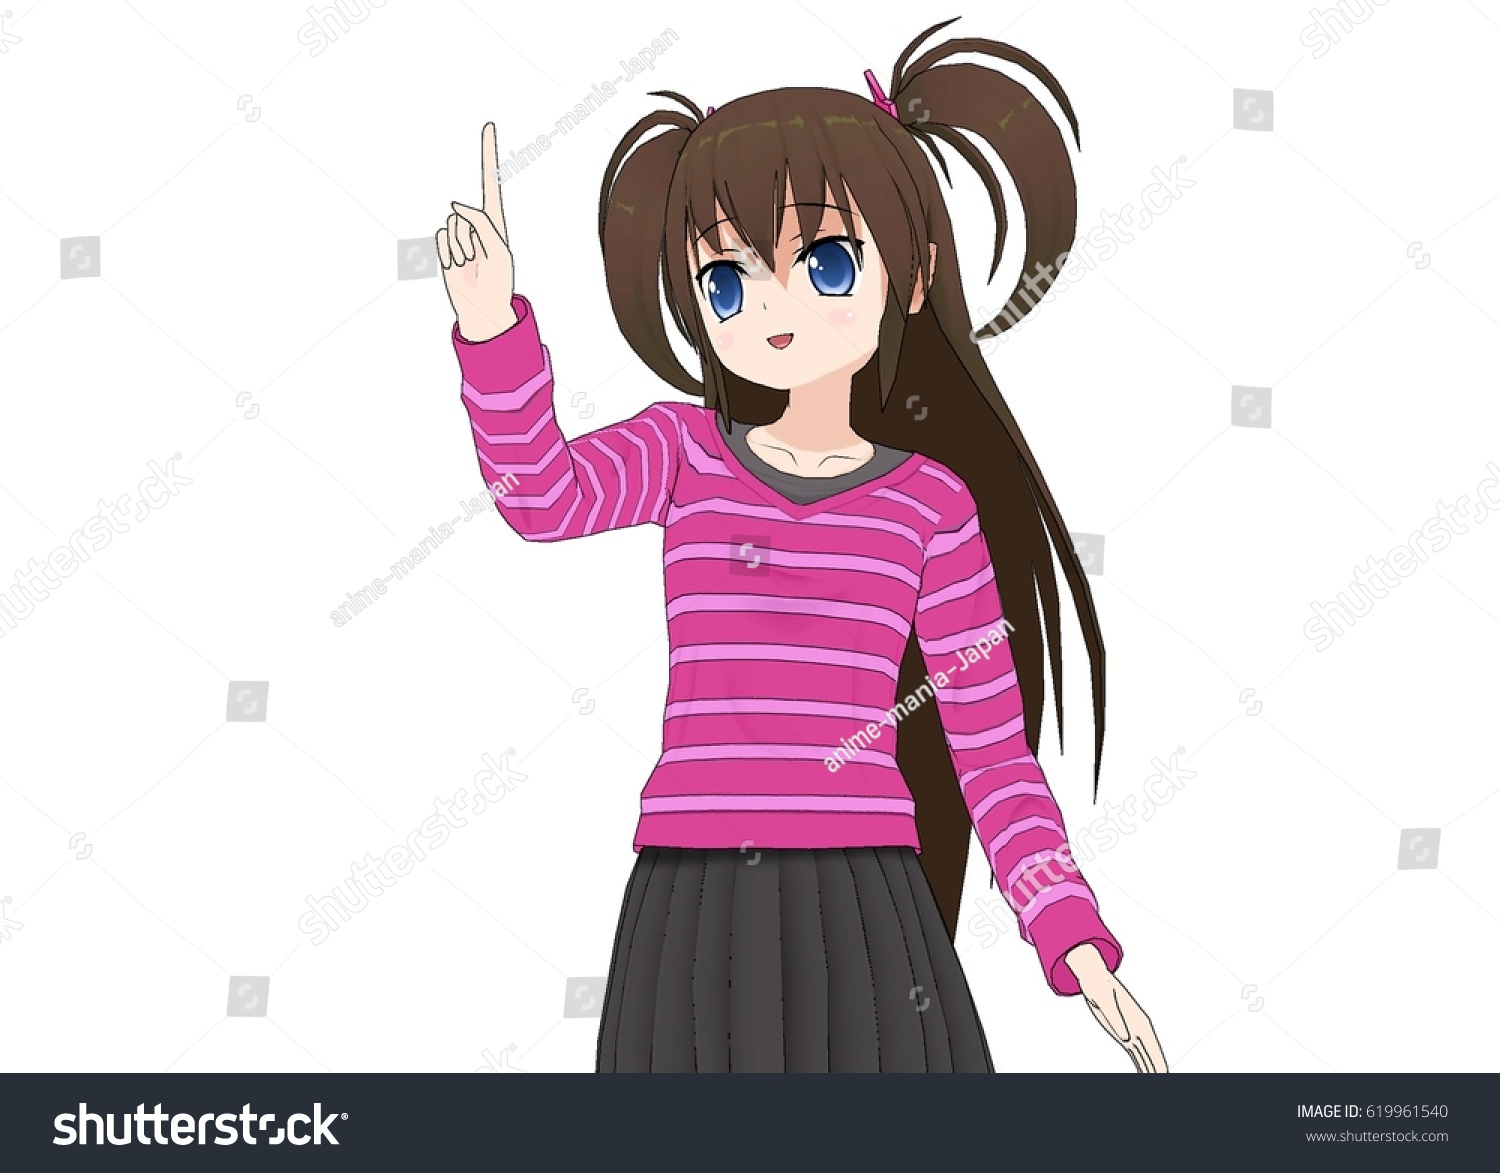 alex hegedus add photo anime girl with pigtails